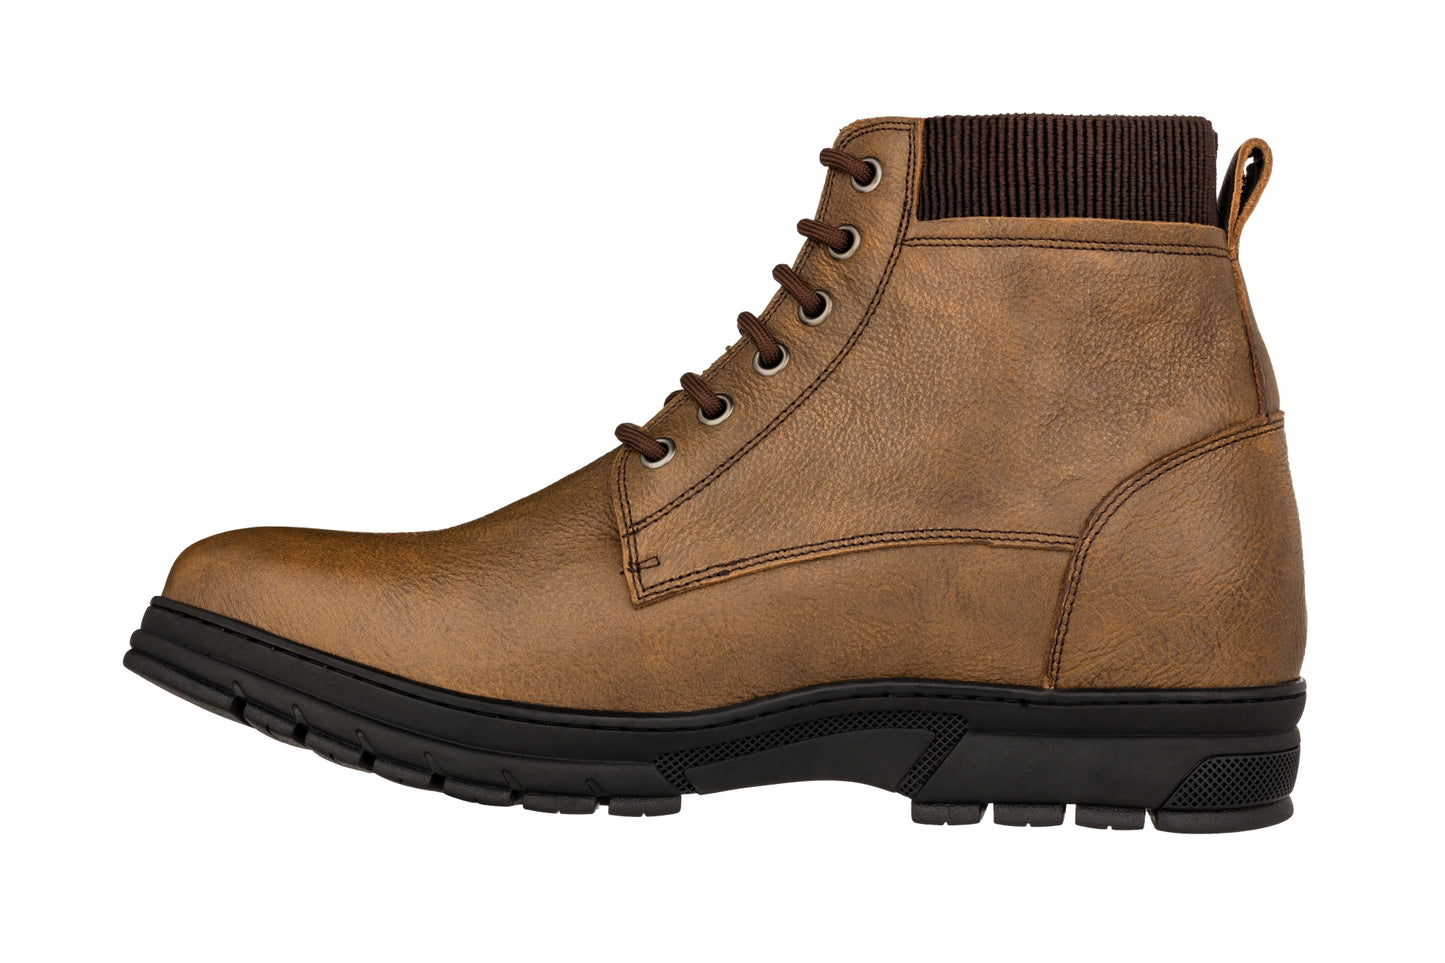 Elevator shoes height increase TOTO - K84017 - 2.8 Inches Taller (Khaki) - High Top Work Boots